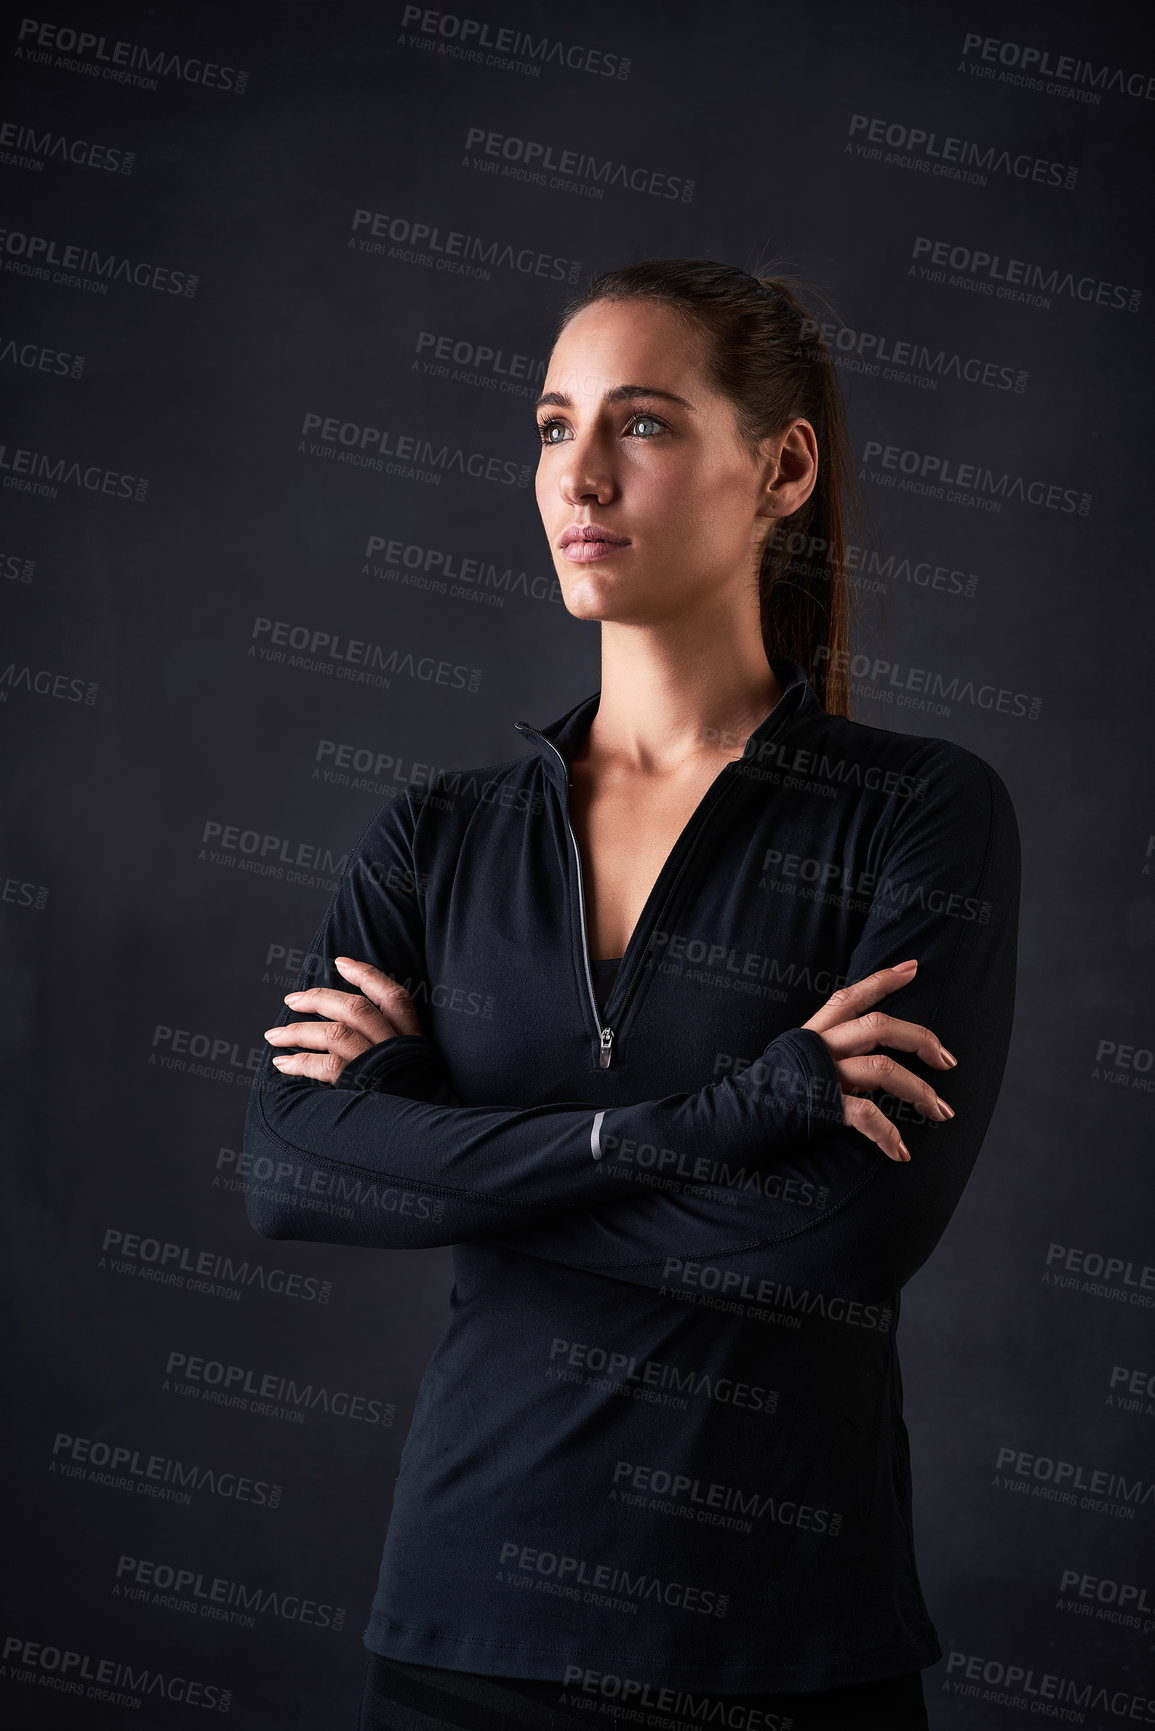 Buy stock photo Studio shot of a young woman in gym clothes standing with her arms crossed against a dark background